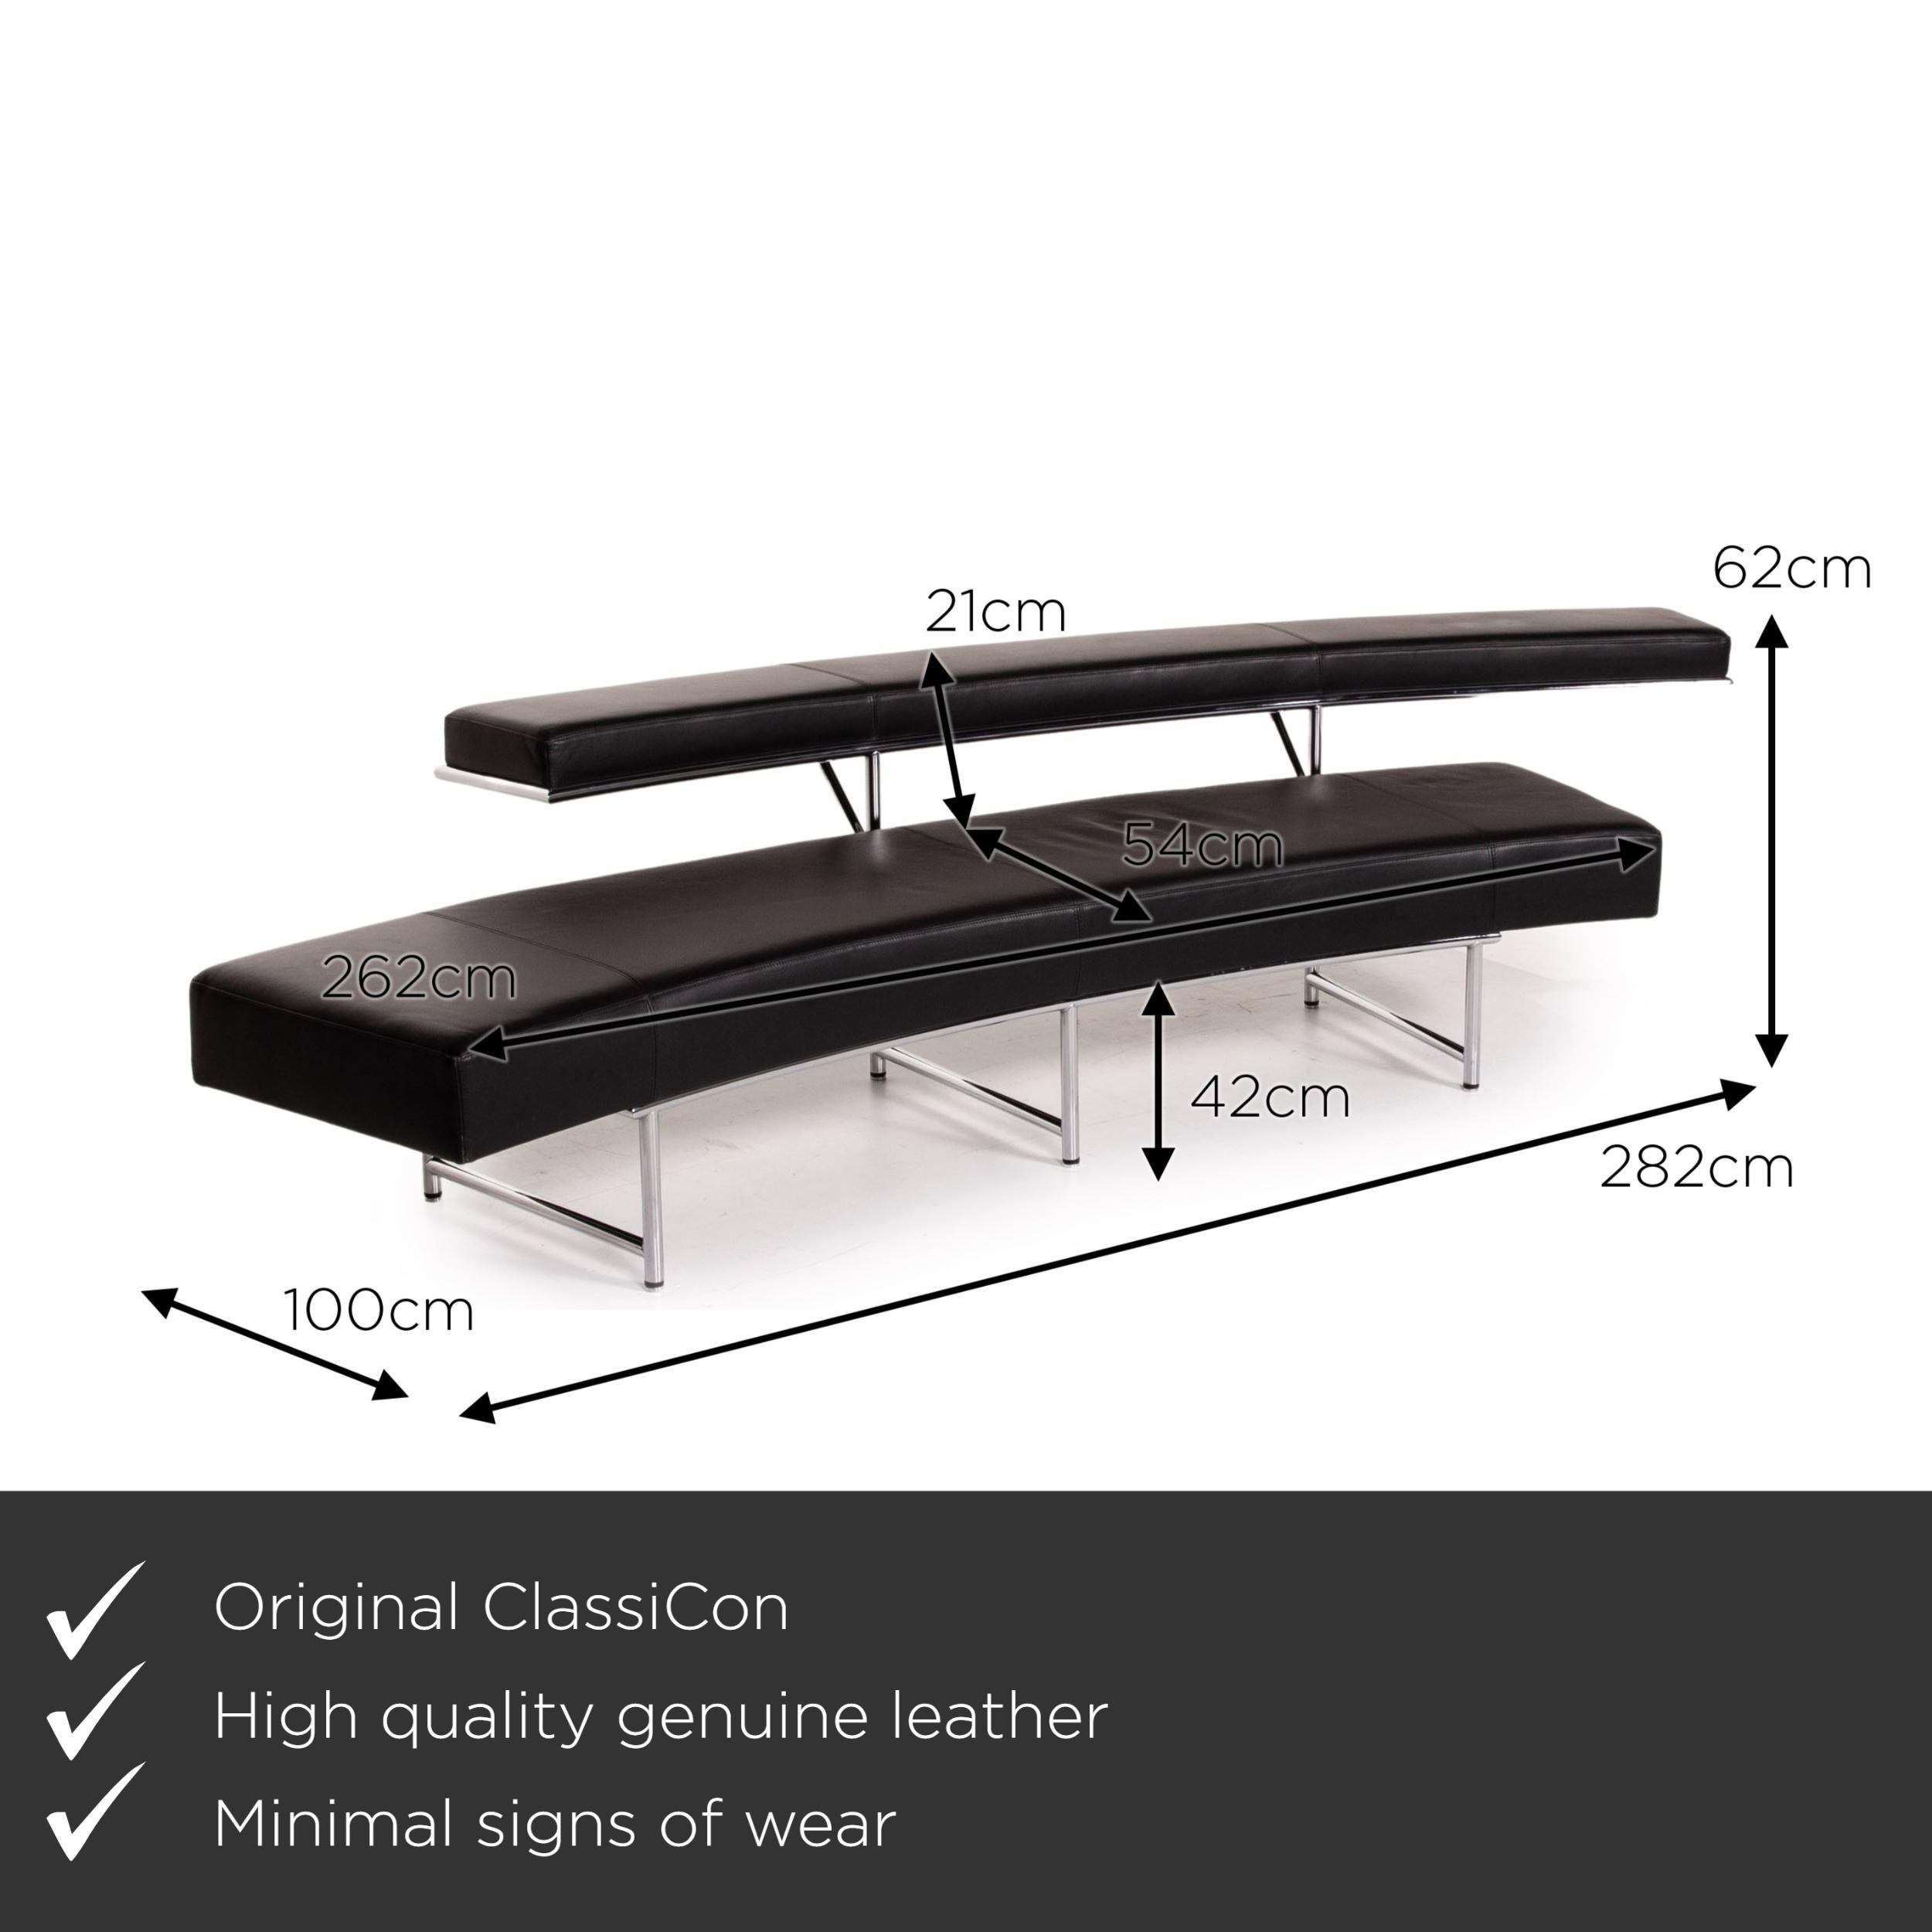 We present to you a ClassiCon Monte Carlo leather sofas black four-seat couch.


 Product measurements in centimeters:
 

Depth 100
Width 282
Height 62
Seat height 42
Rest height 62
Seat depth 54
Seat width 226
Back height 21.
 